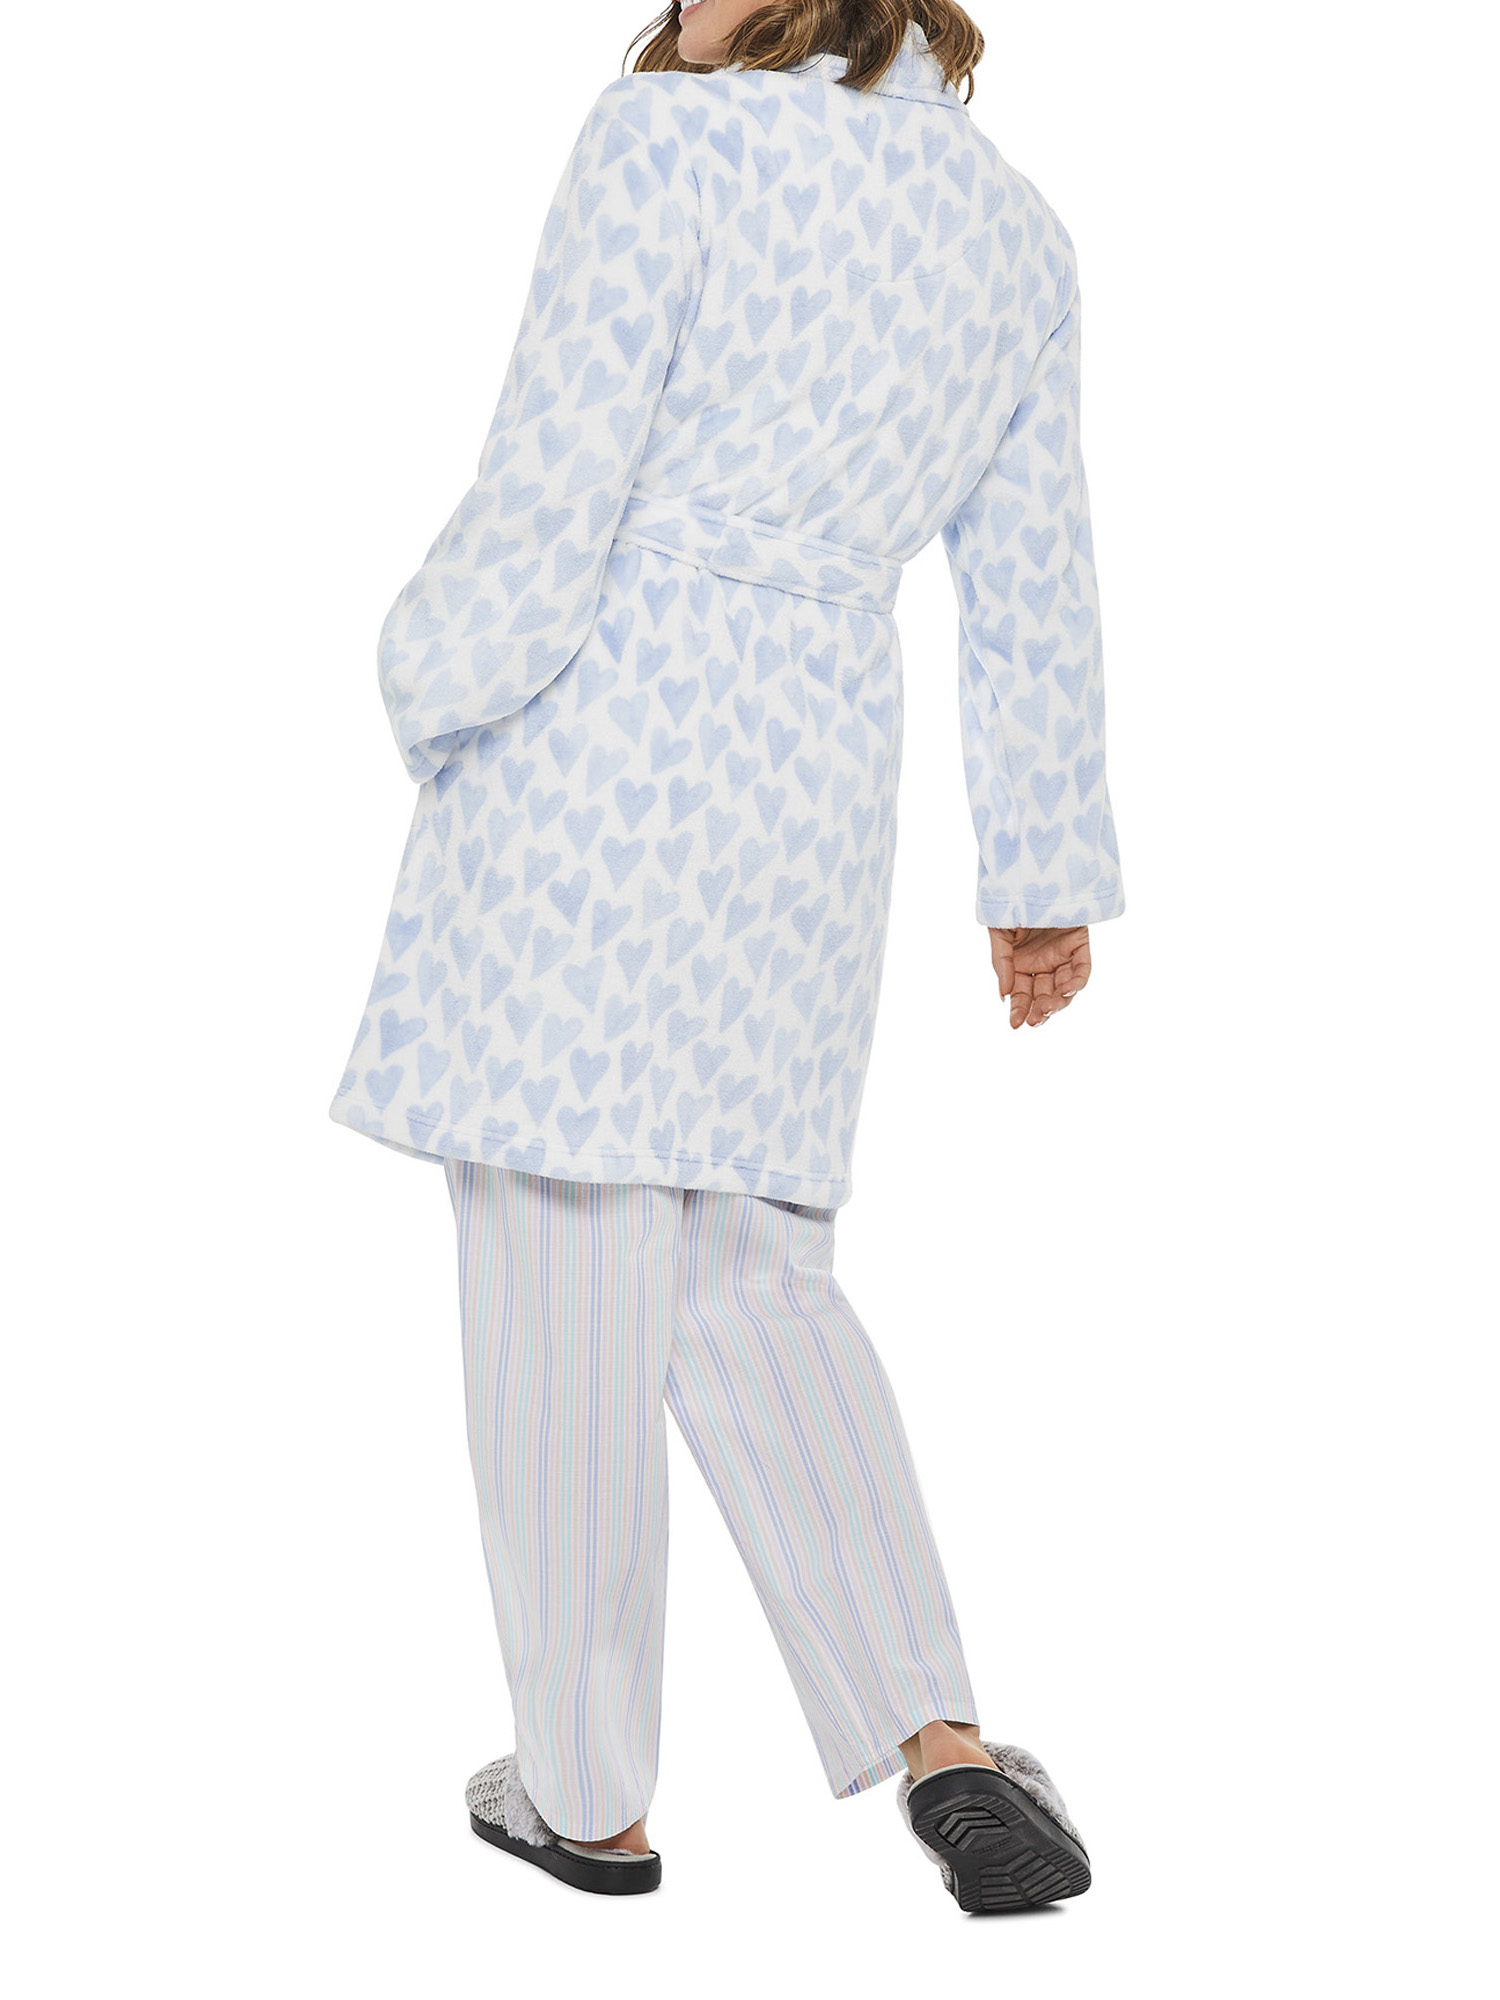 GEORGE Hearts Afternoon Polyester Robe (Women's or Women's Plus) 1 Pack - image 5 of 7